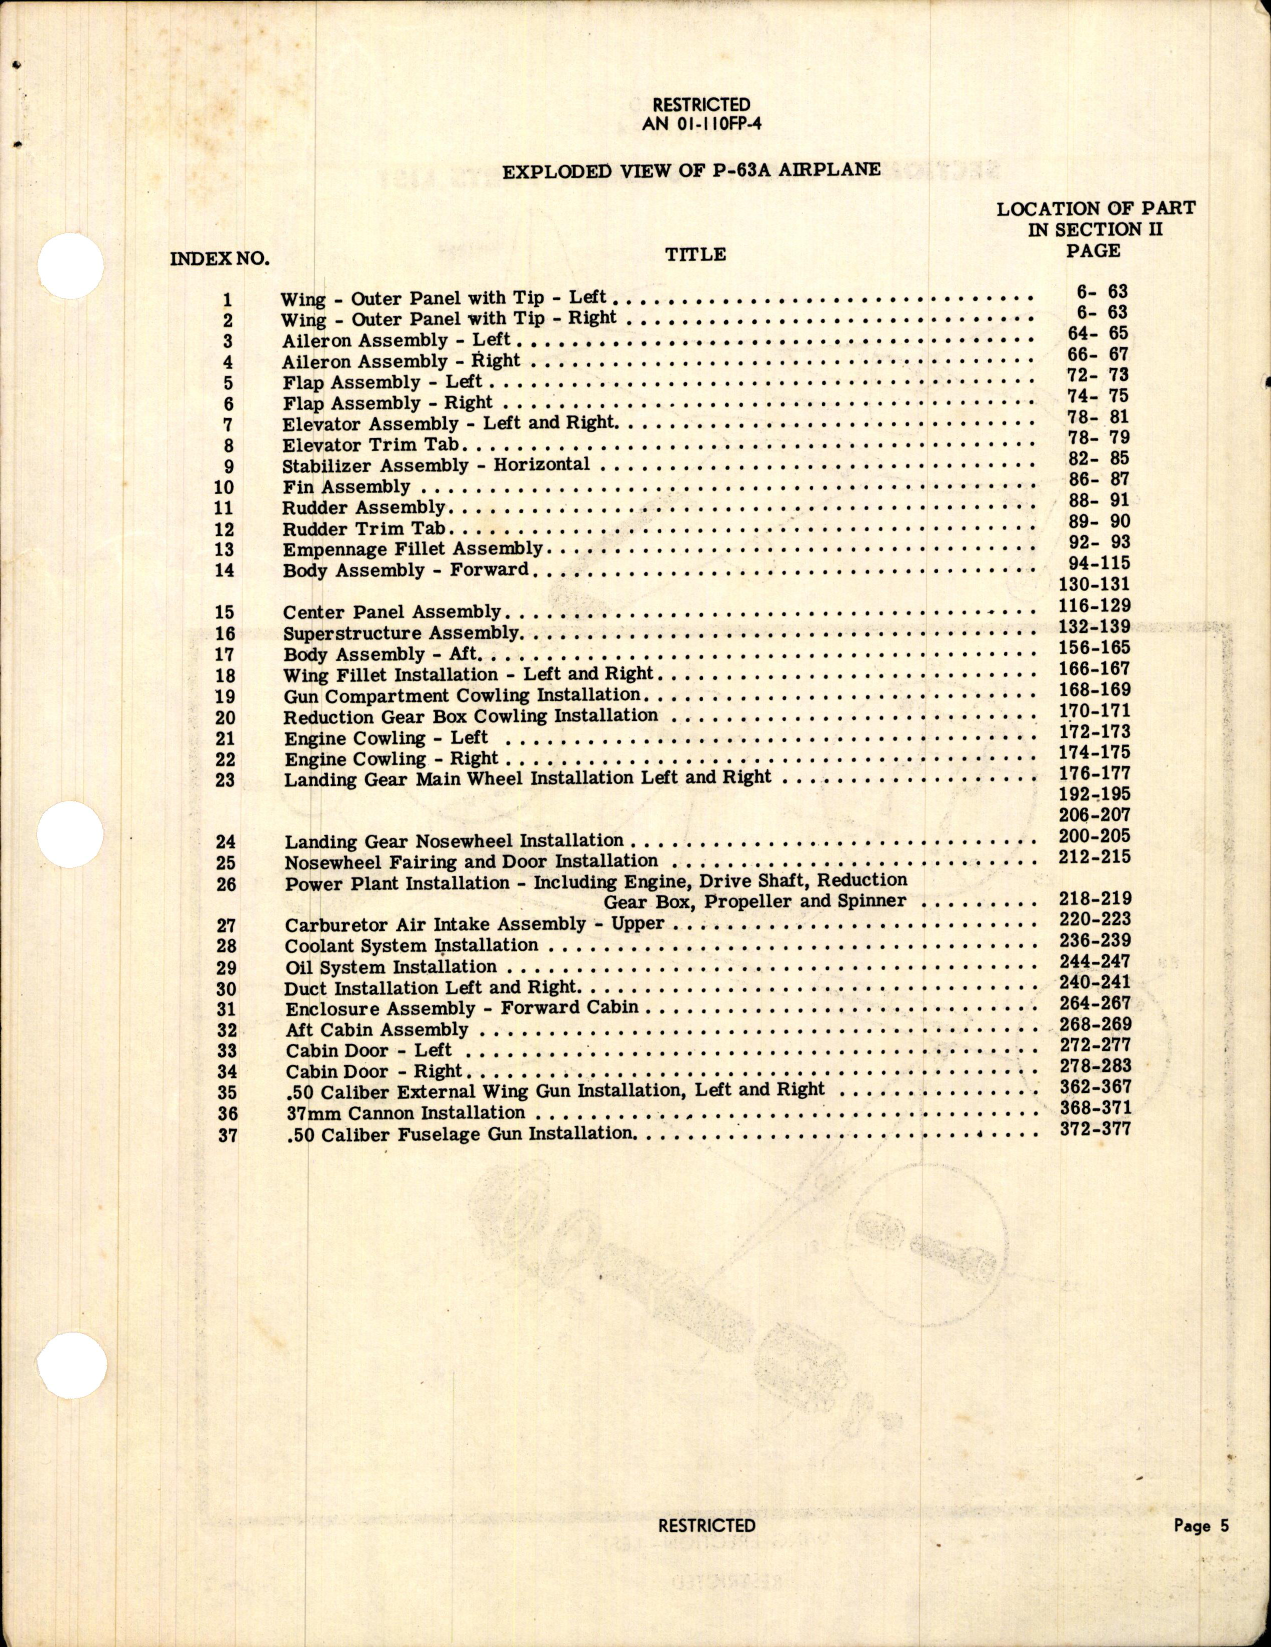 Sample page 7 from AirCorps Library document: Parts Catalog for the P-63A-1 